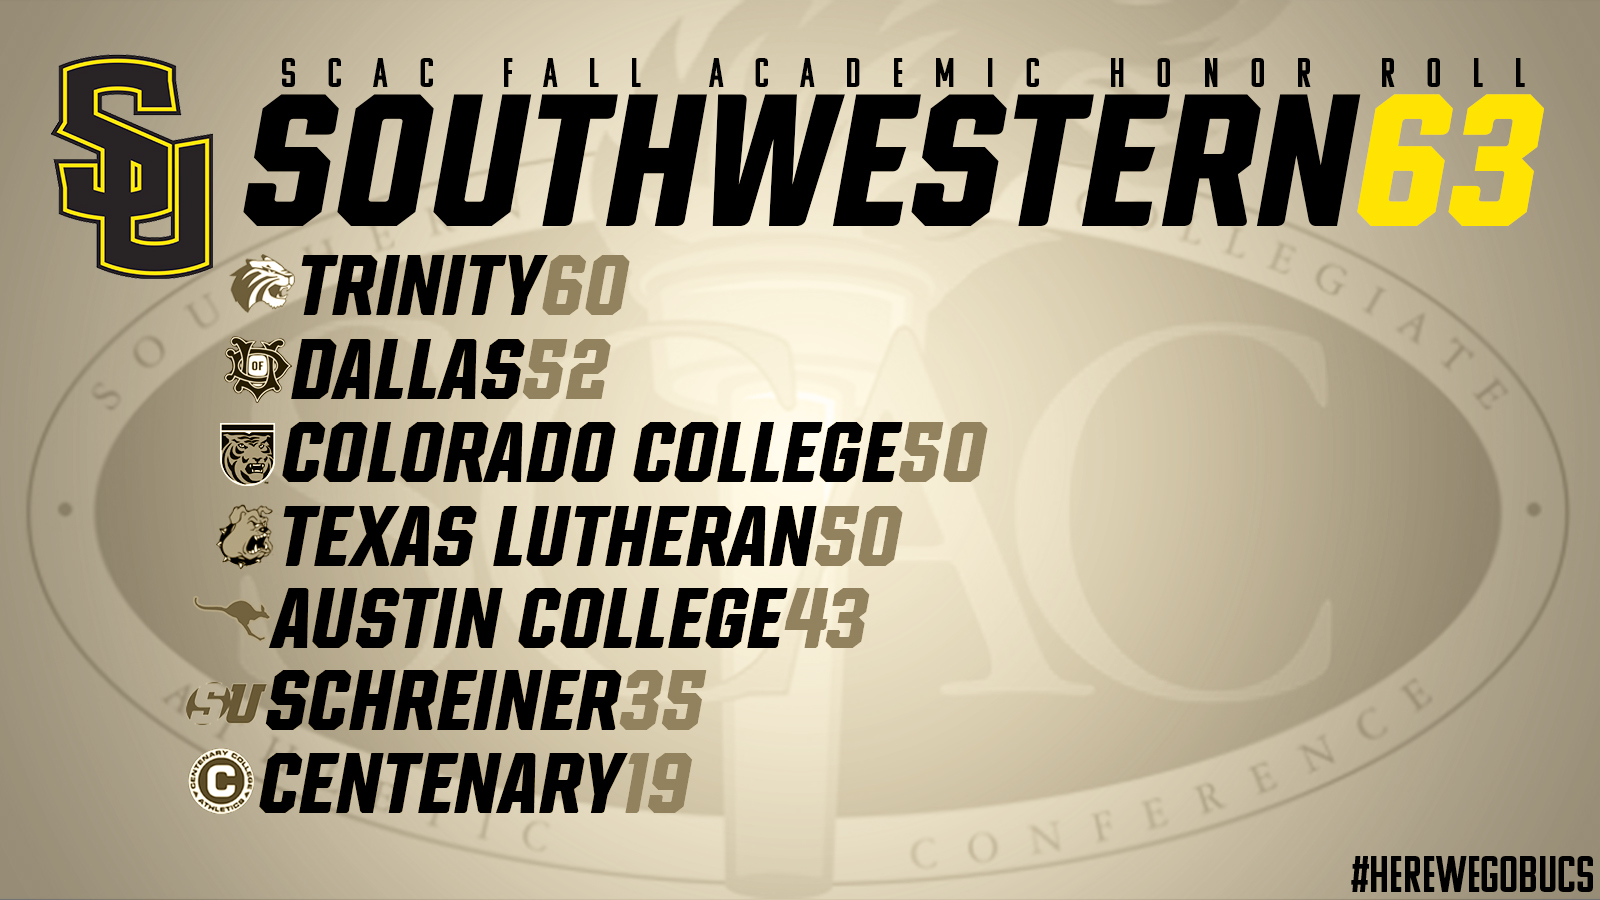 Southwestern Leads SCAC with 63 Student-Athlete on Academic Honor Roll